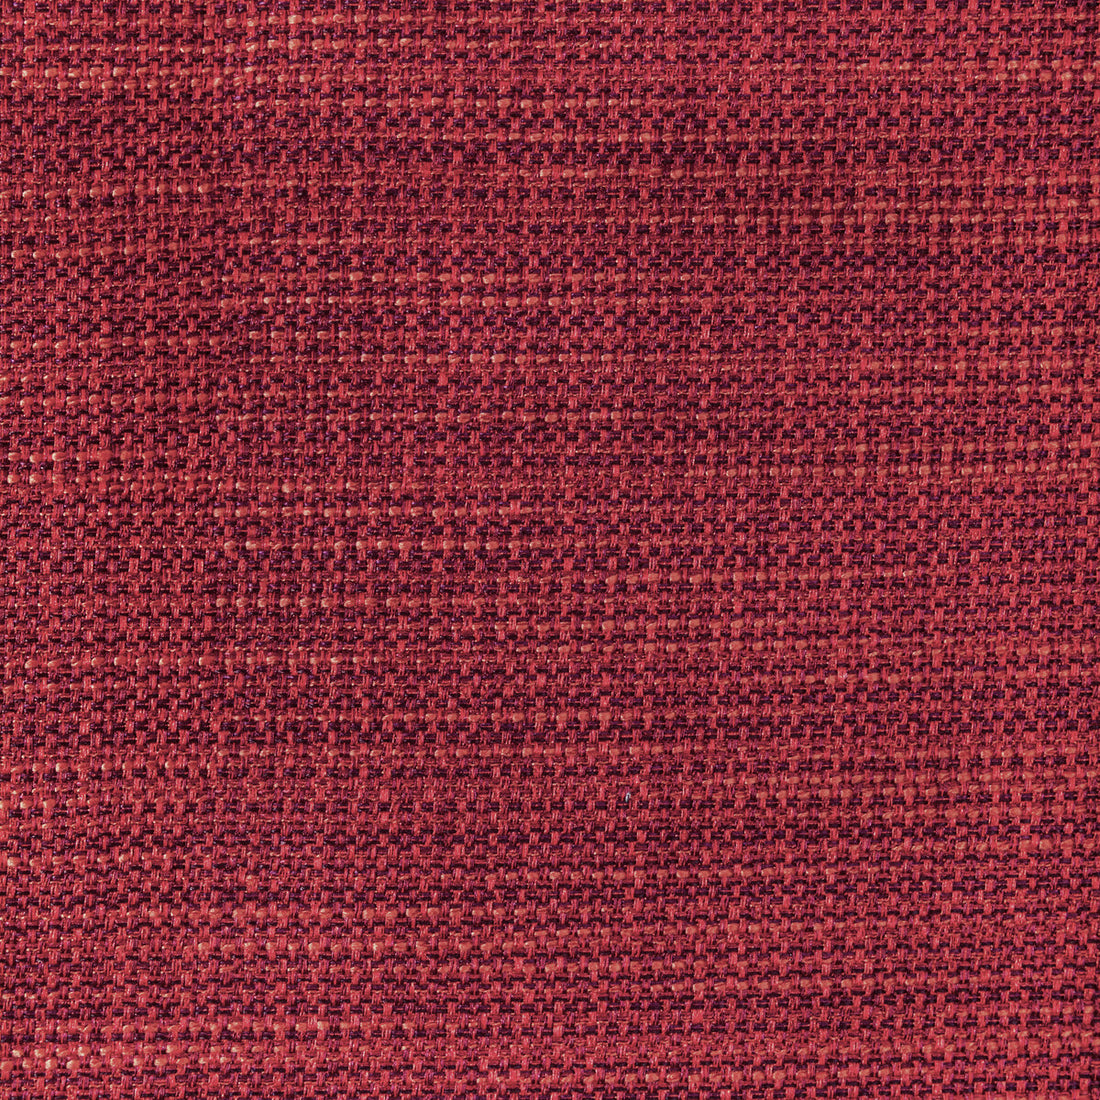 Luma Texture fabric in pomegranate color - pattern 4947.24.0 - by Kravet Contract in the Fr Window Luma Texture collection